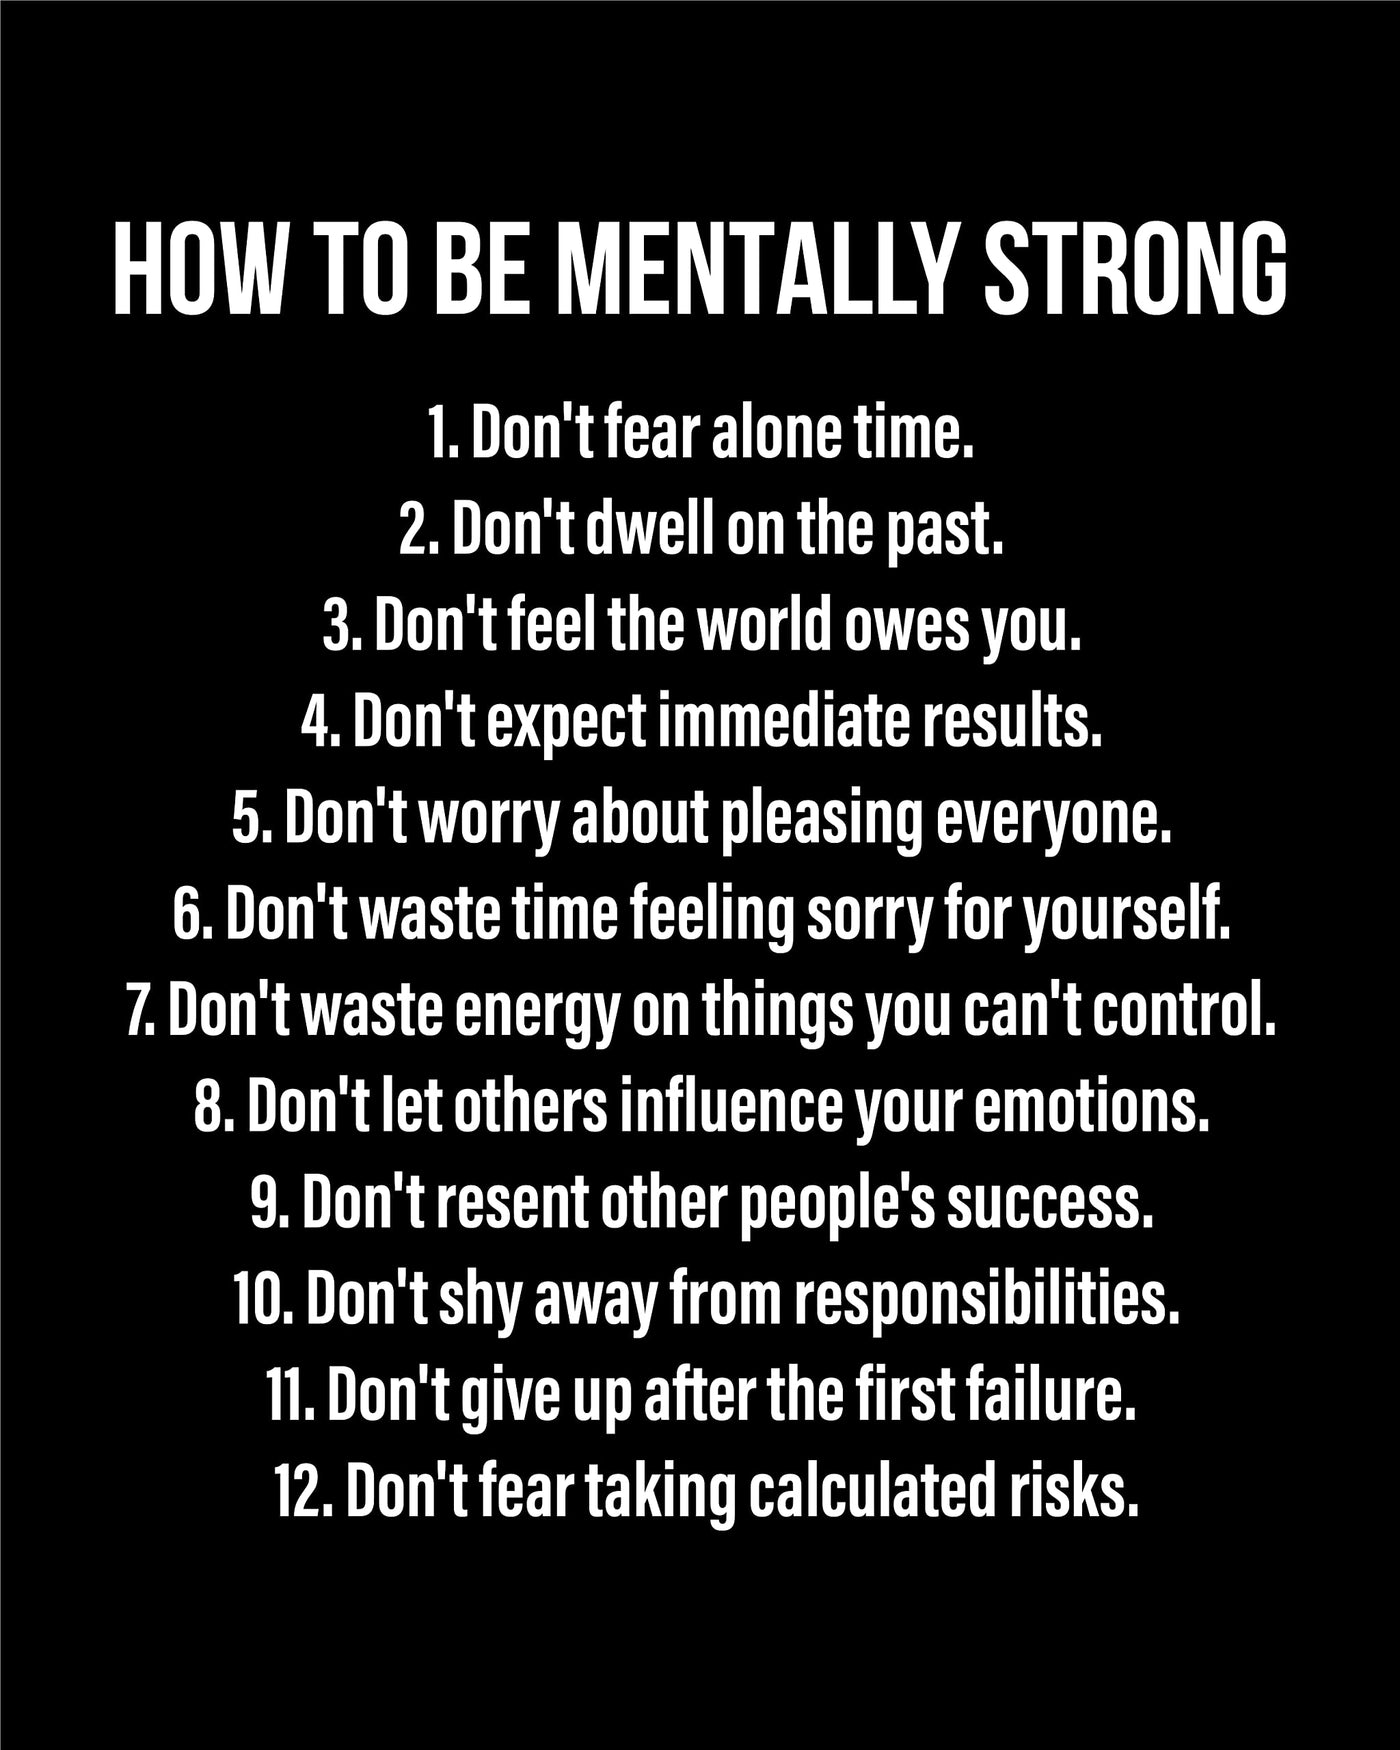 How to Be Mentally Strong-8 x 10" Motivational Wall Decor Art. Typographic Black and White Photo Print -Ready to Frame. Inspirational Home-Office-Classroom-Gym Decor. Great Gift for Motivation!